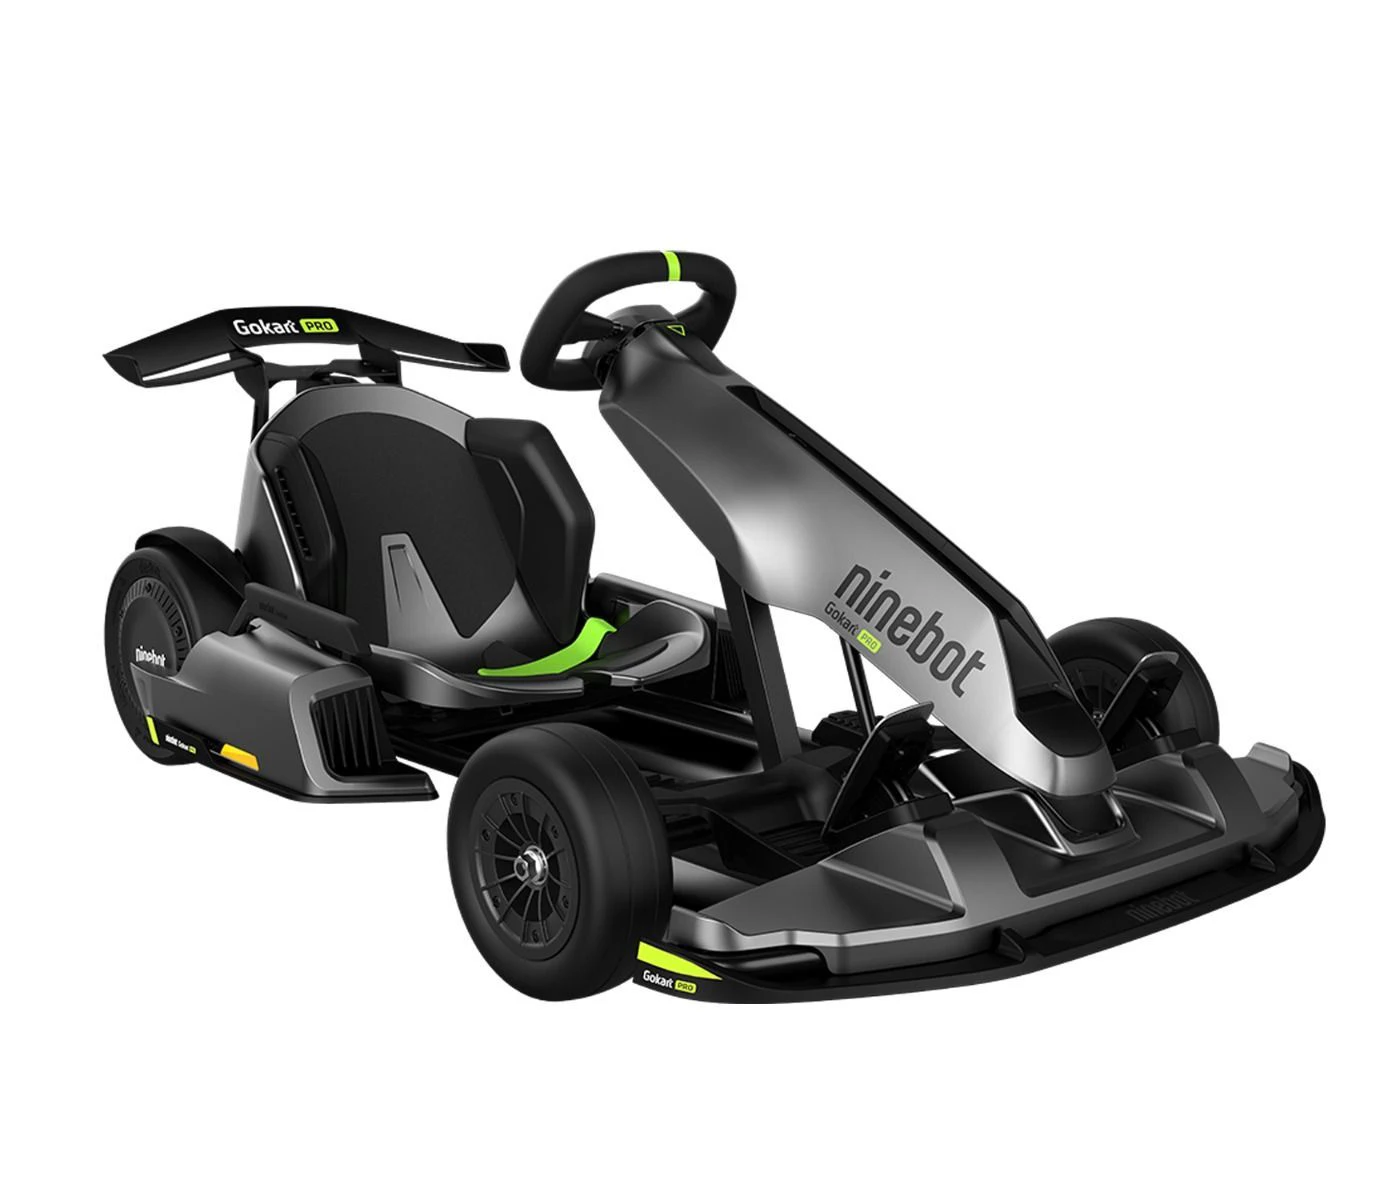 

2021 Original Gokart Pro 37km/h Electric Kick Scooter For Adults 900w Self Balancing Electric Scooters